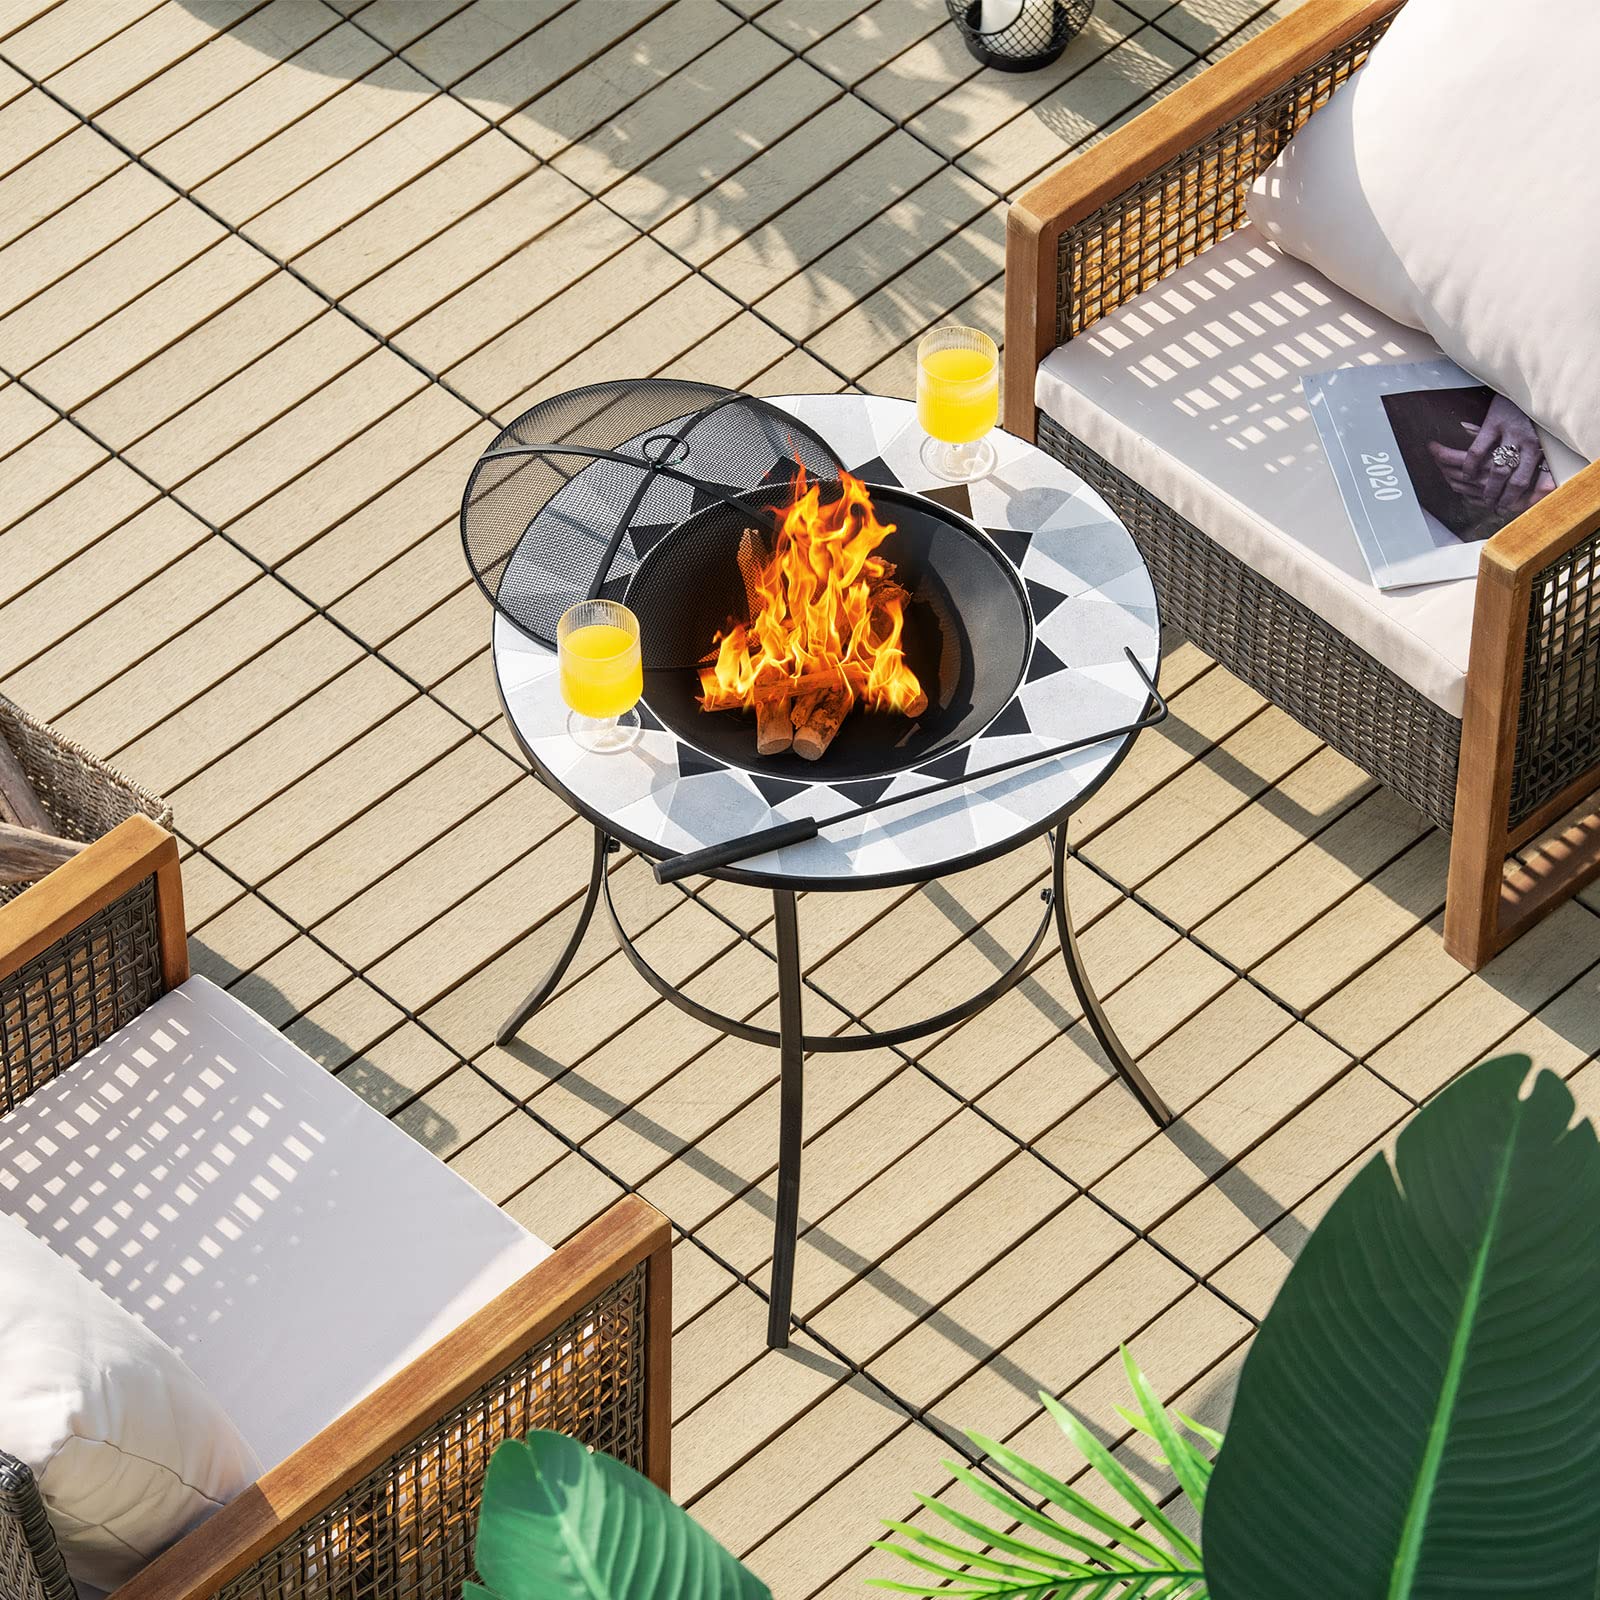 Giantex Fire Pit Table, Outdoor Fire Pit with Mesh Cover, Fire Poker, Tile Tabletop